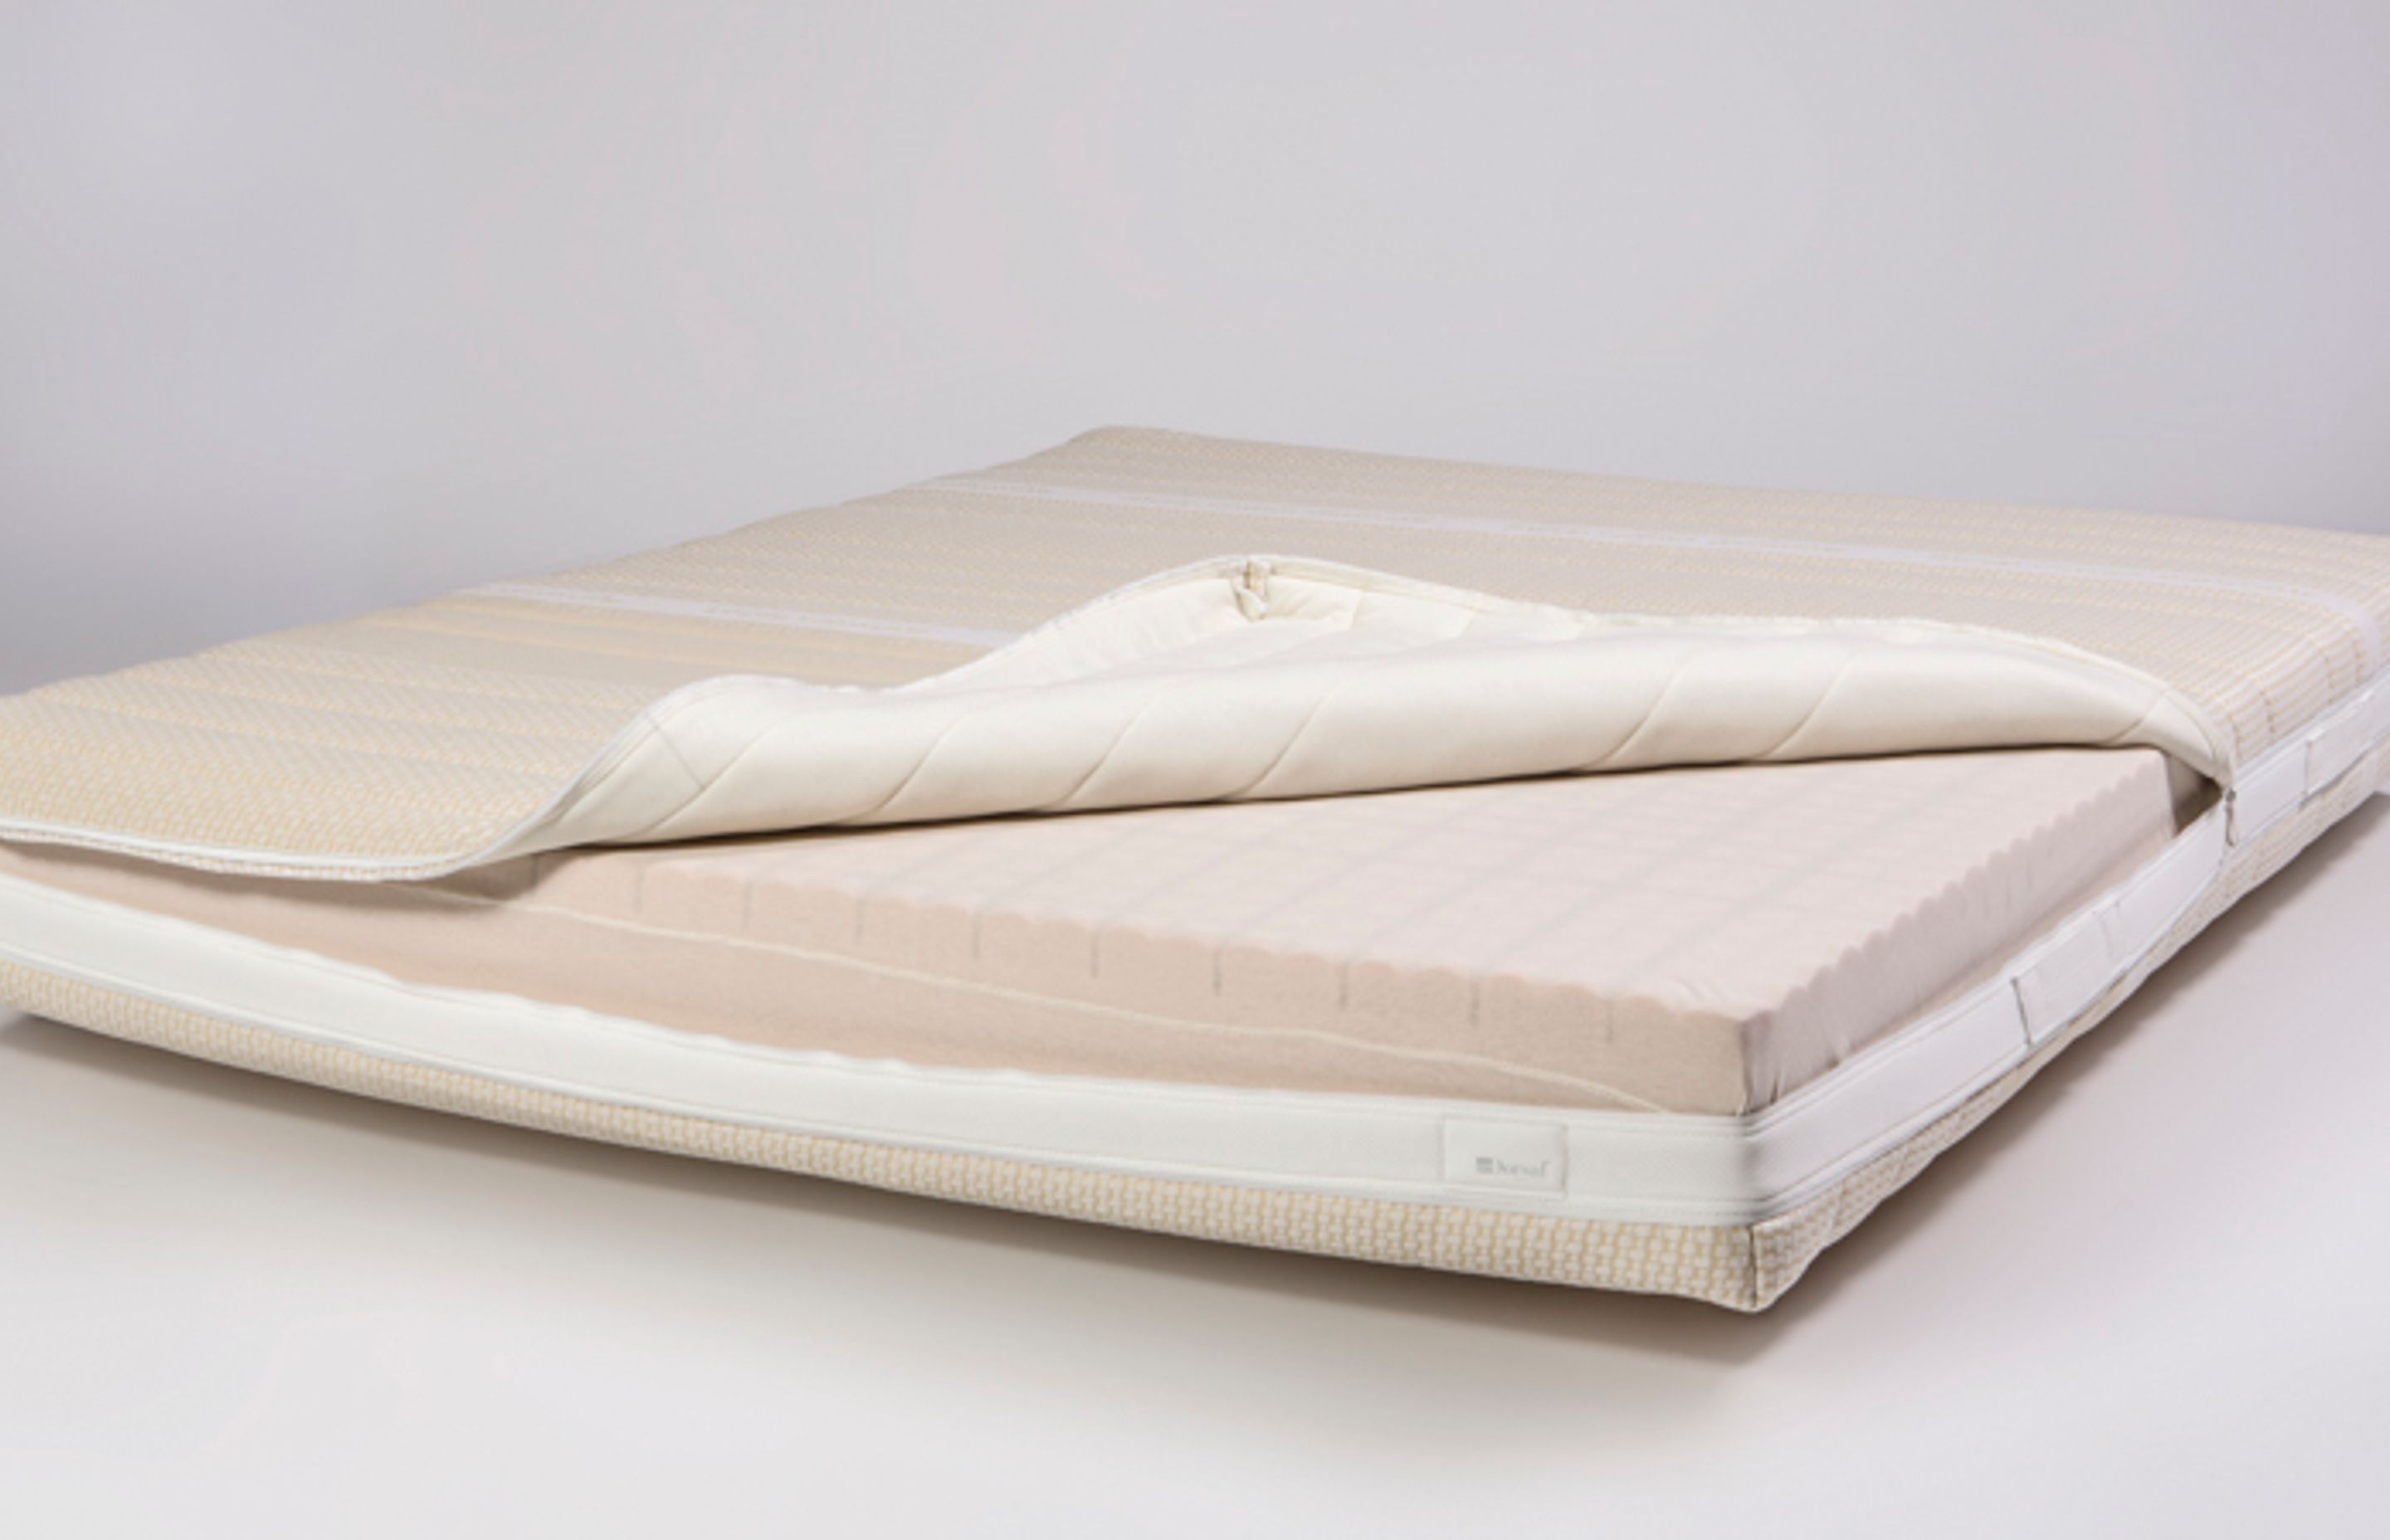 The Dorsal Sunflower mattress is made from natural seed oil.